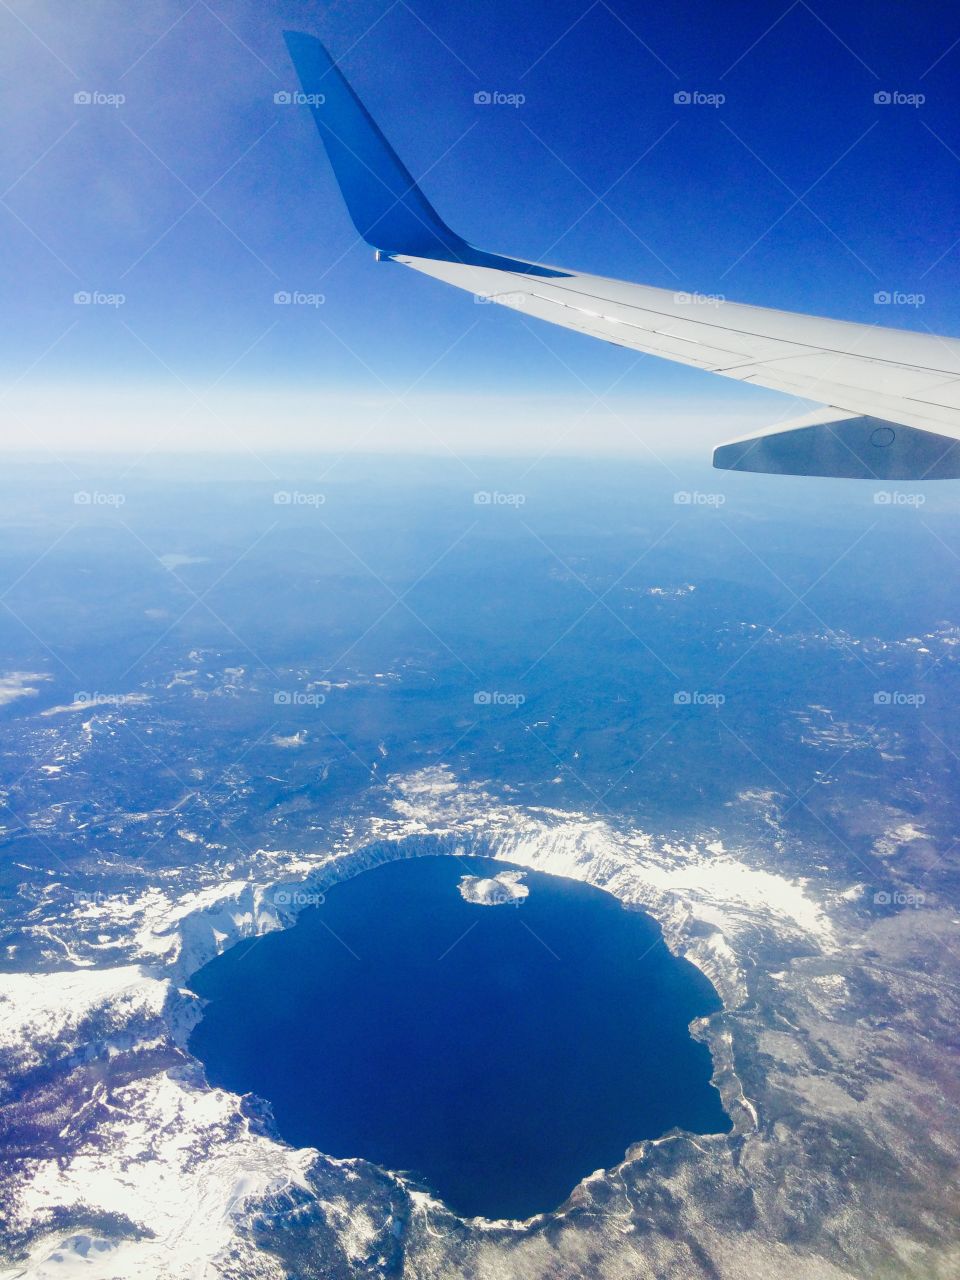 Crater Lake from the Air. Flying back from Palm Springs on Alaska Airlines and got this amazing view of Crater Lake!